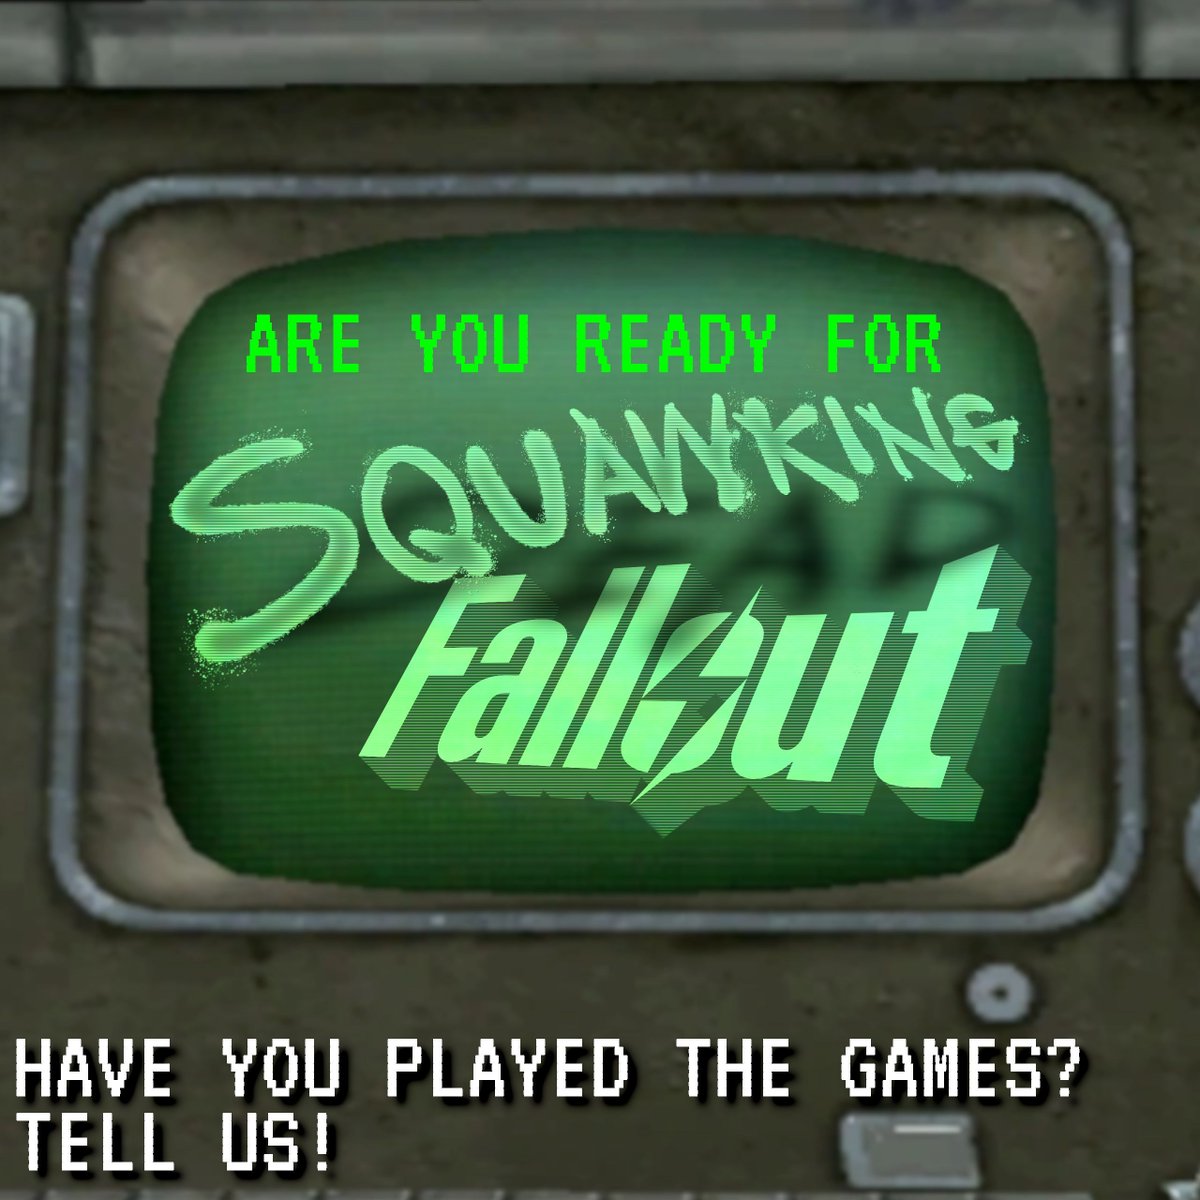 Join us tomorrow night as we discuss #AmazonPrime's NEW SERIES: #Fallout! We're ALSO seeking out gamers who have played the games (1997-2018) to JOIN US ON STREAM! Follow us (FOR FREE) on @Kofi_button or @Patreon to join the conversation (ALSO FREE)!